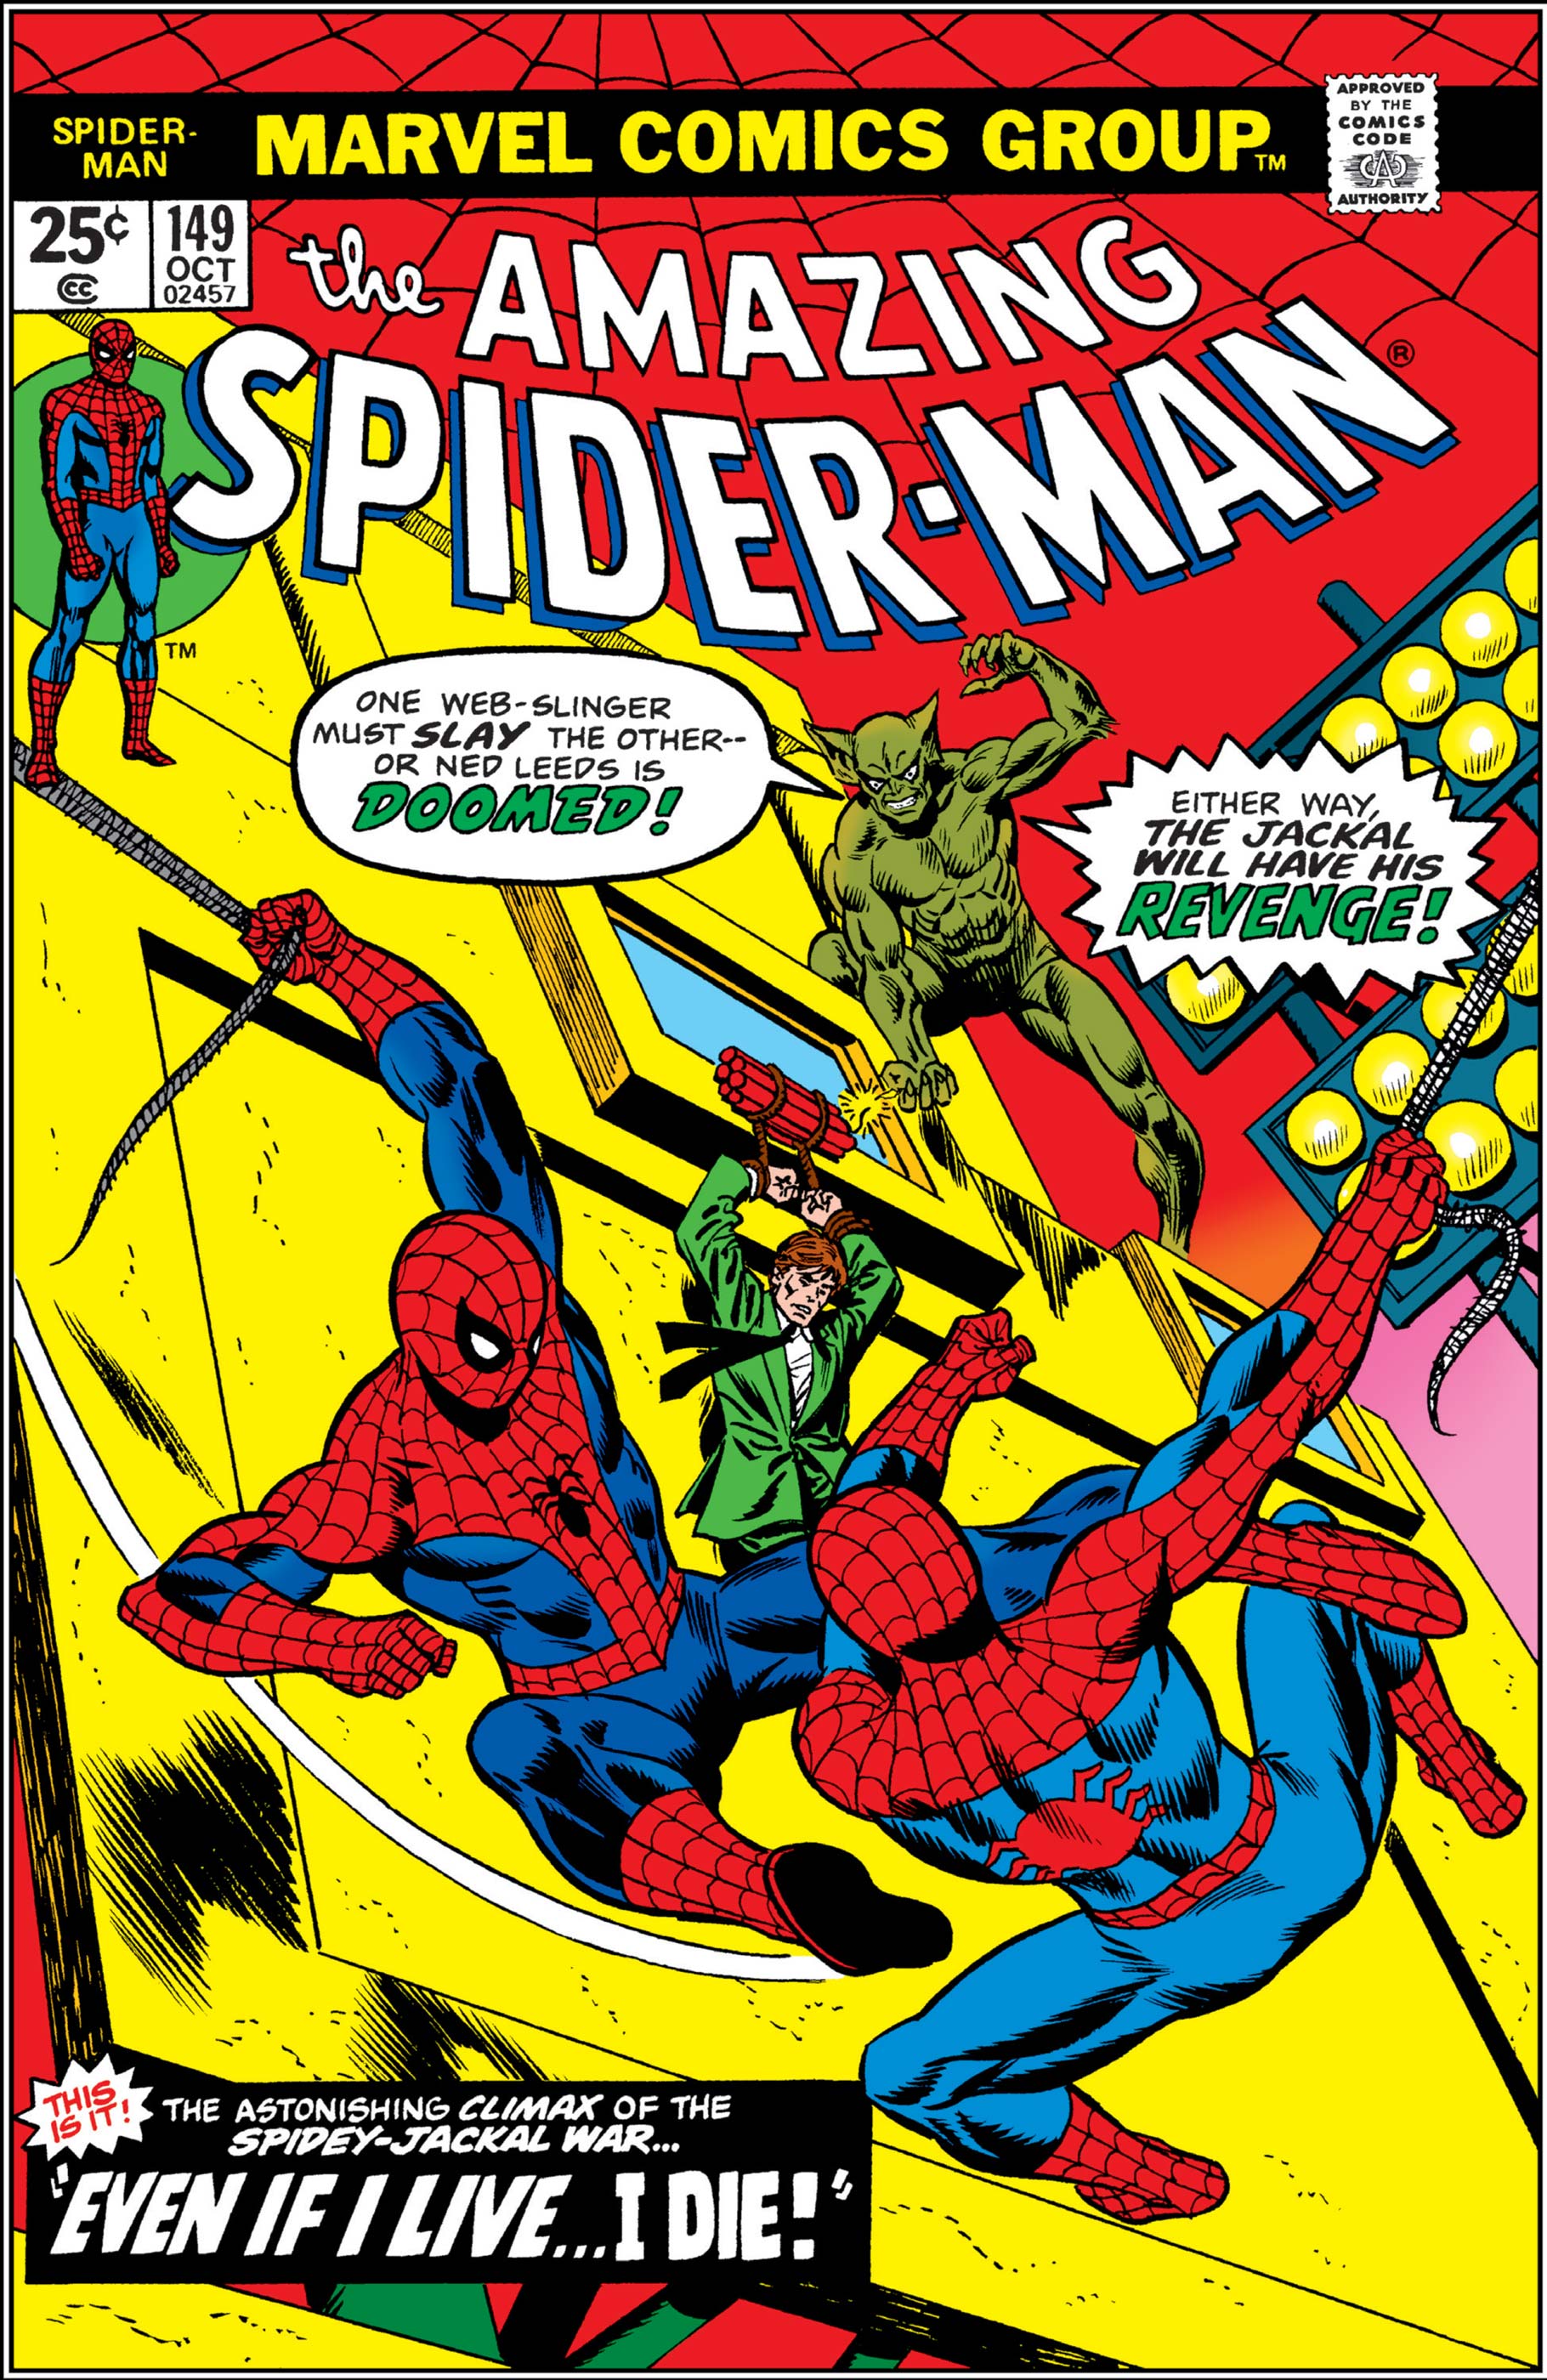 The Amazing Spider-Man (1963) #149 | Comic Issues | Marvel